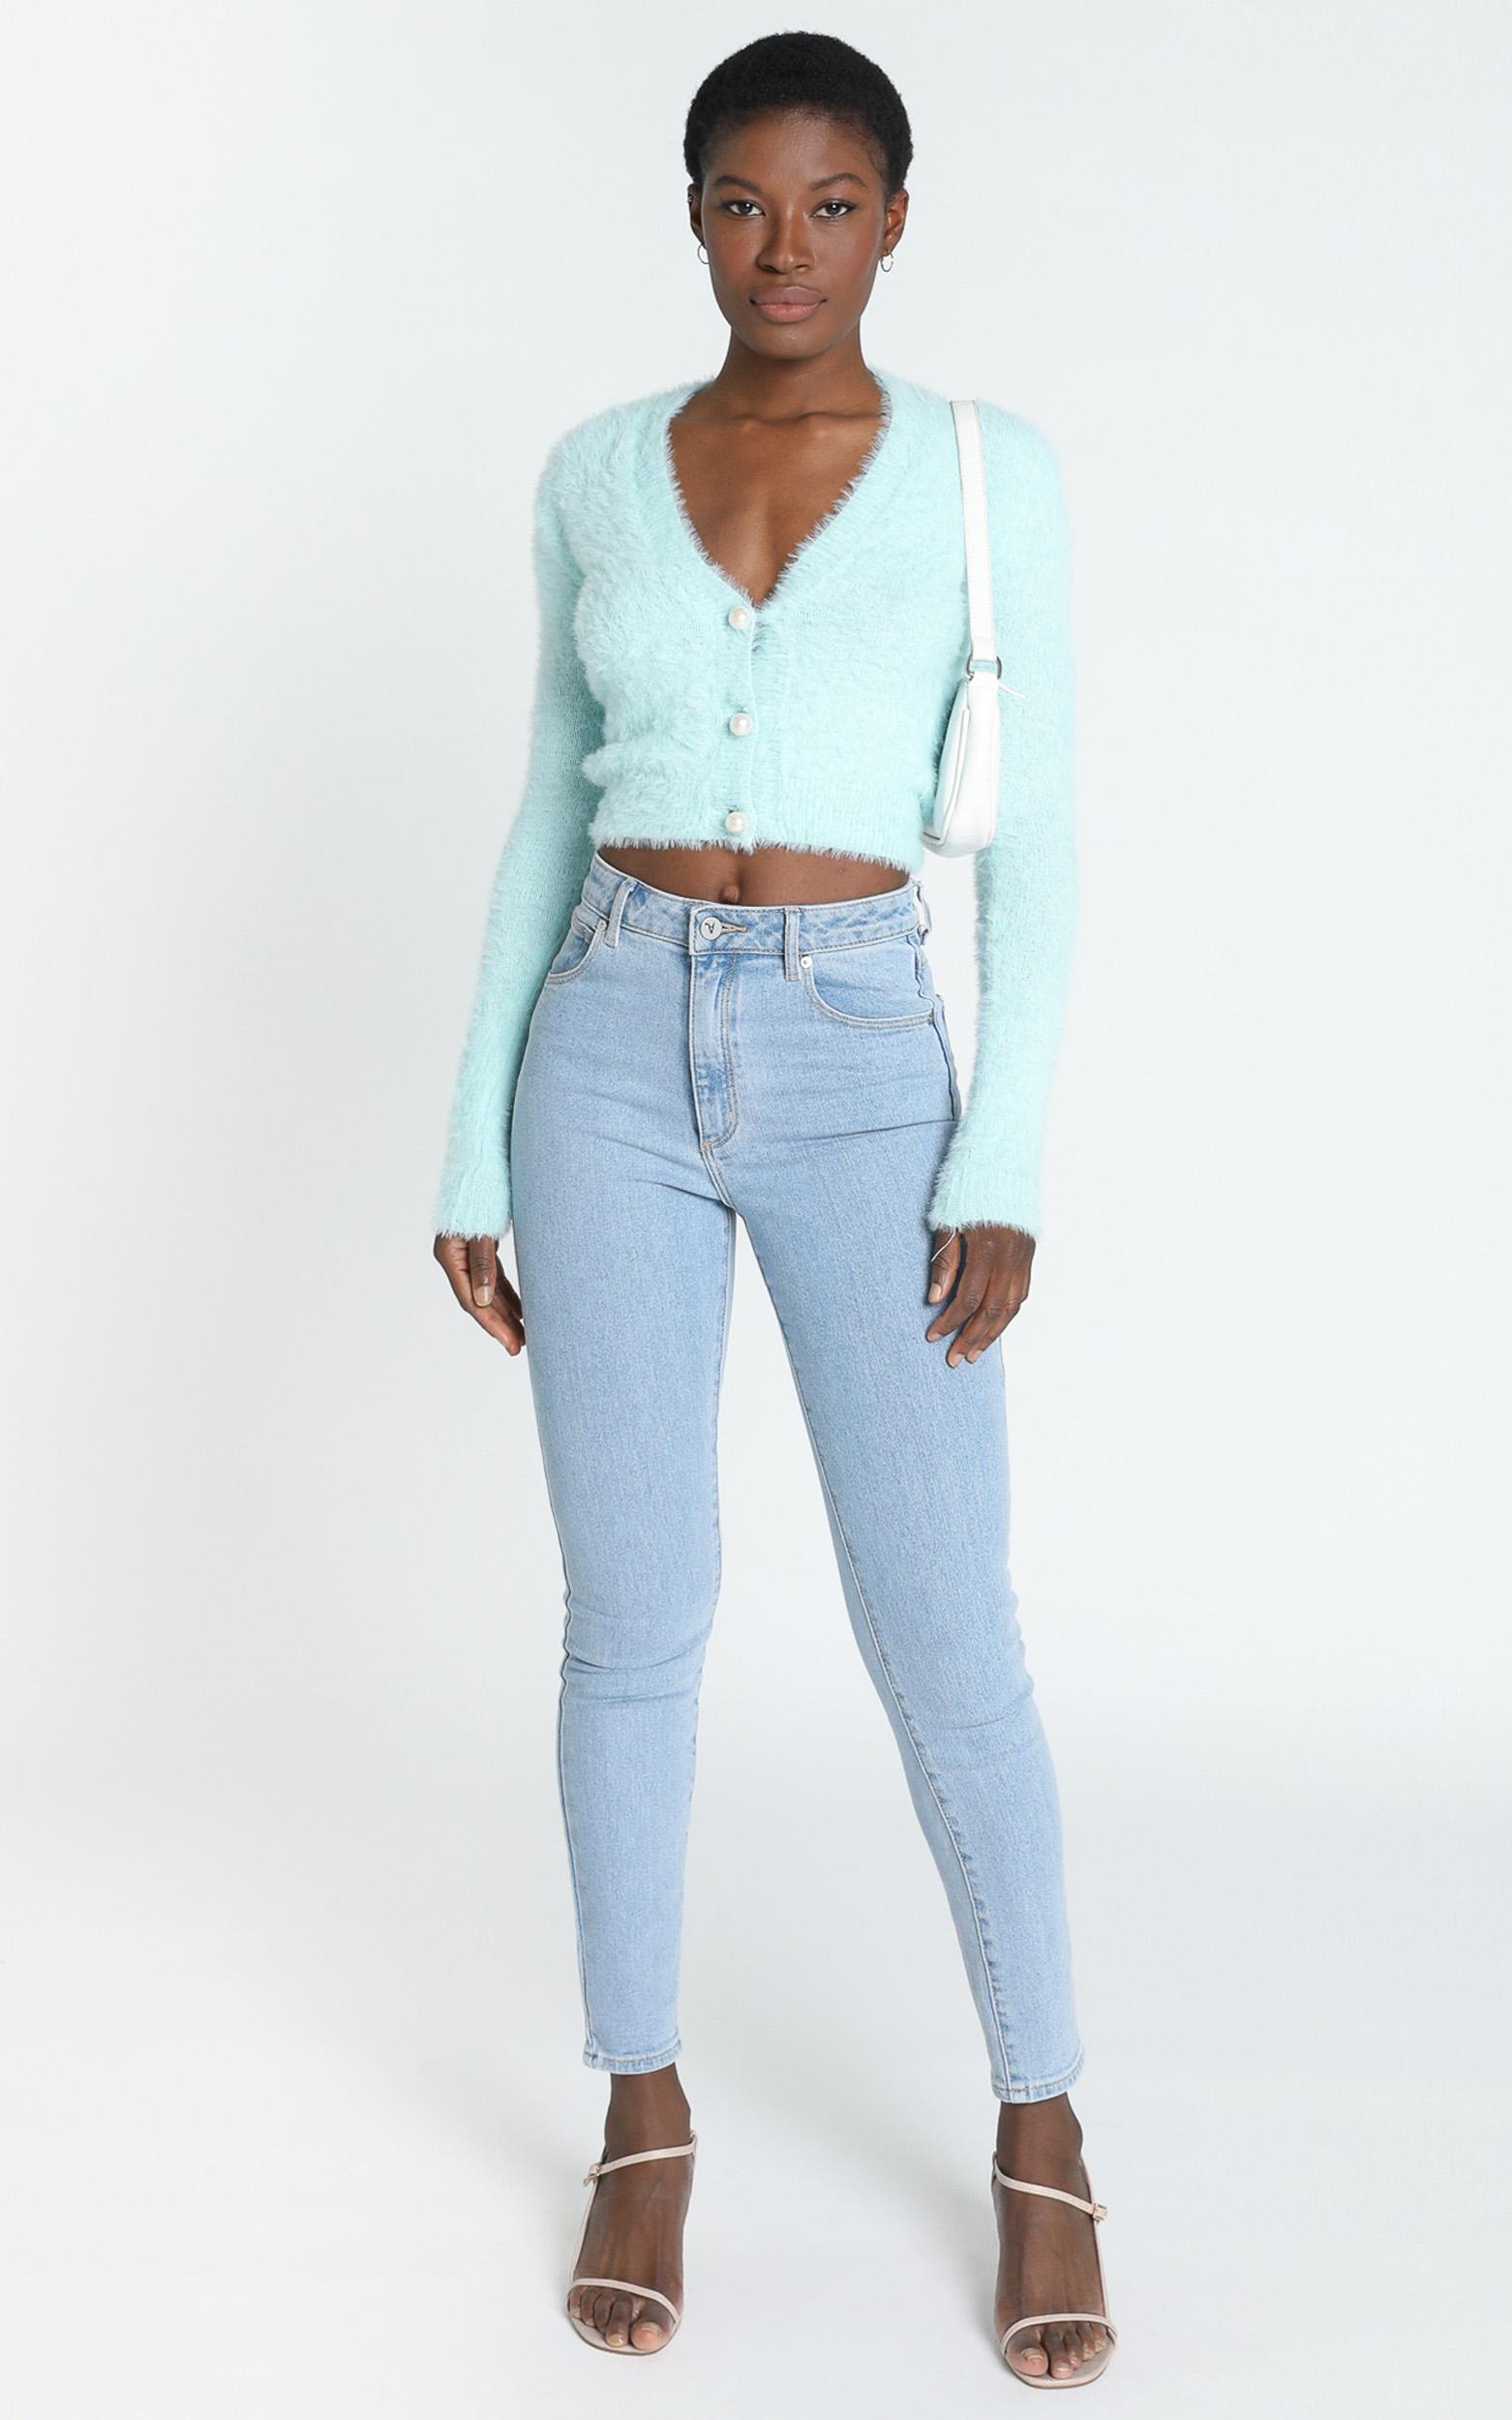 Vegas Baby Knit Top in Ice Blue- 20 (XXXXL), Blue, hi-res image number null